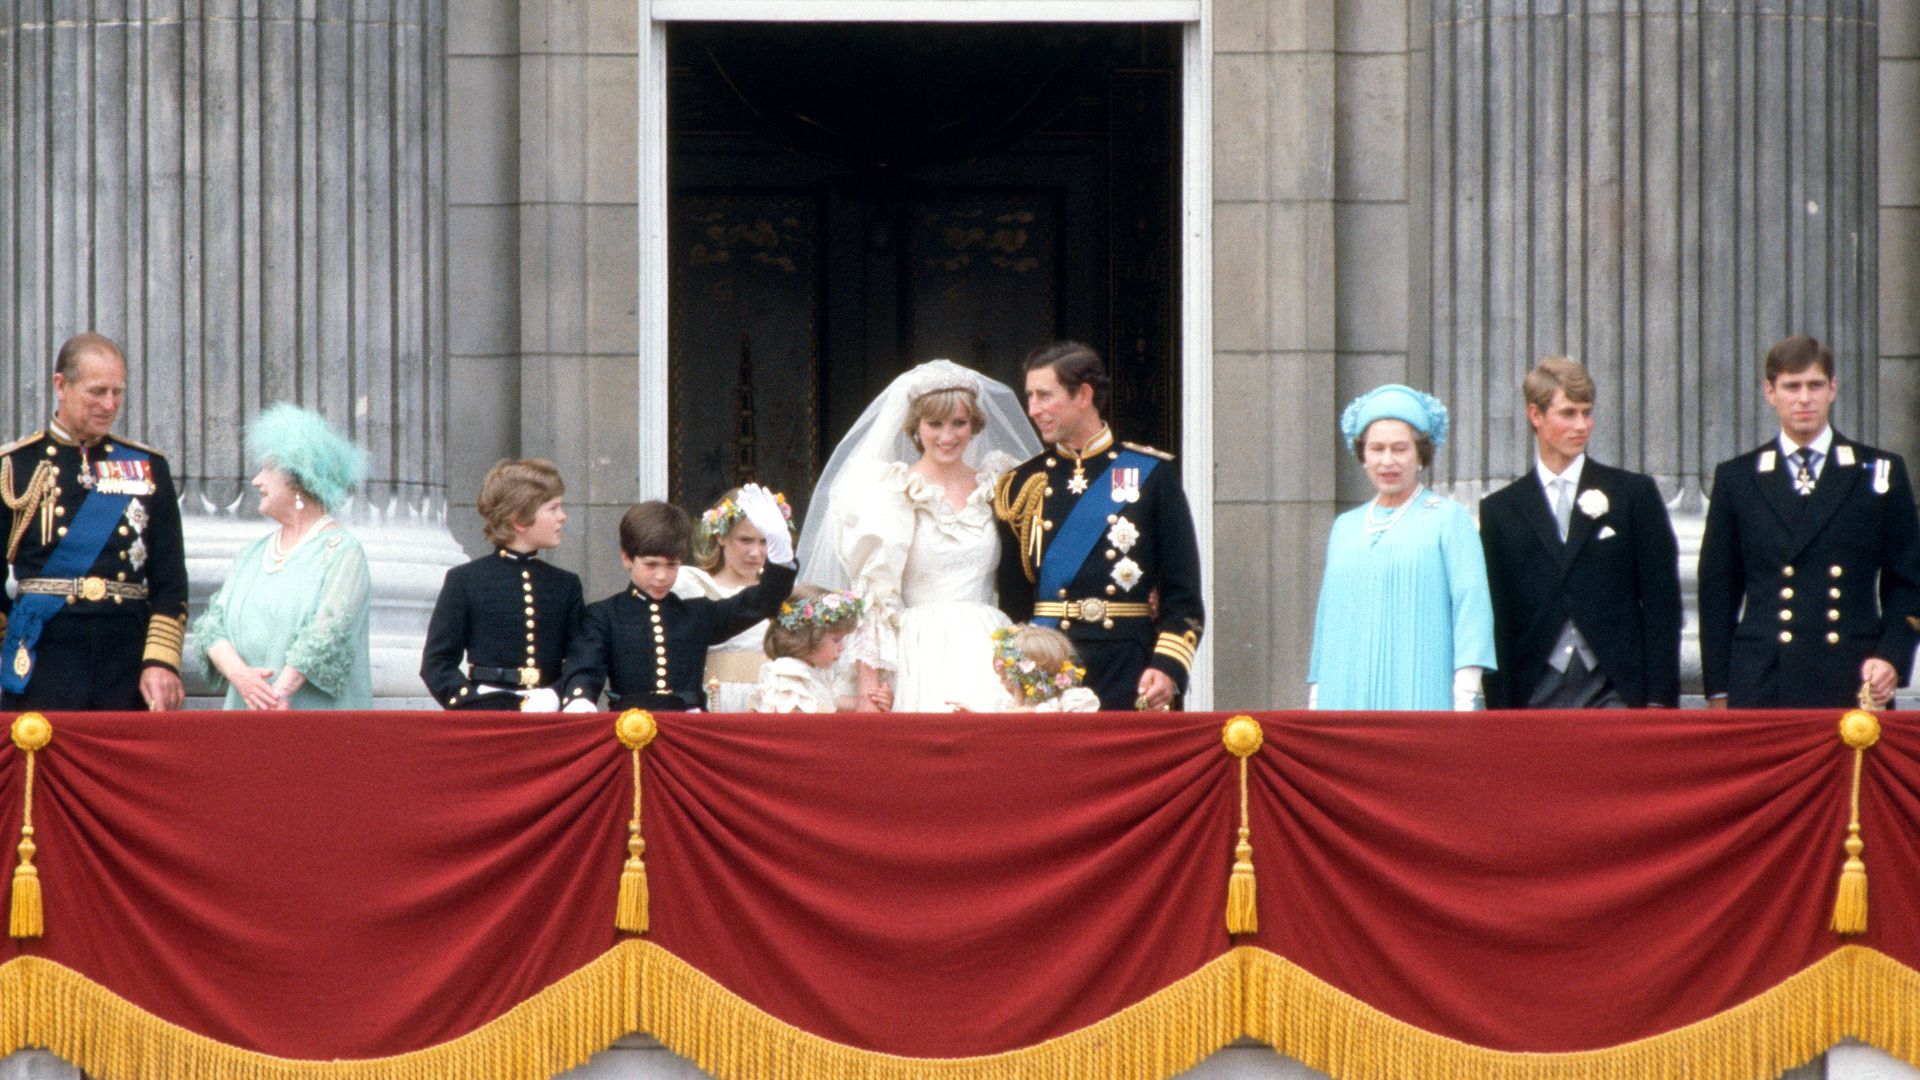 Charles and Diana with their families on the balcony of Buckingham Palace after the wedding